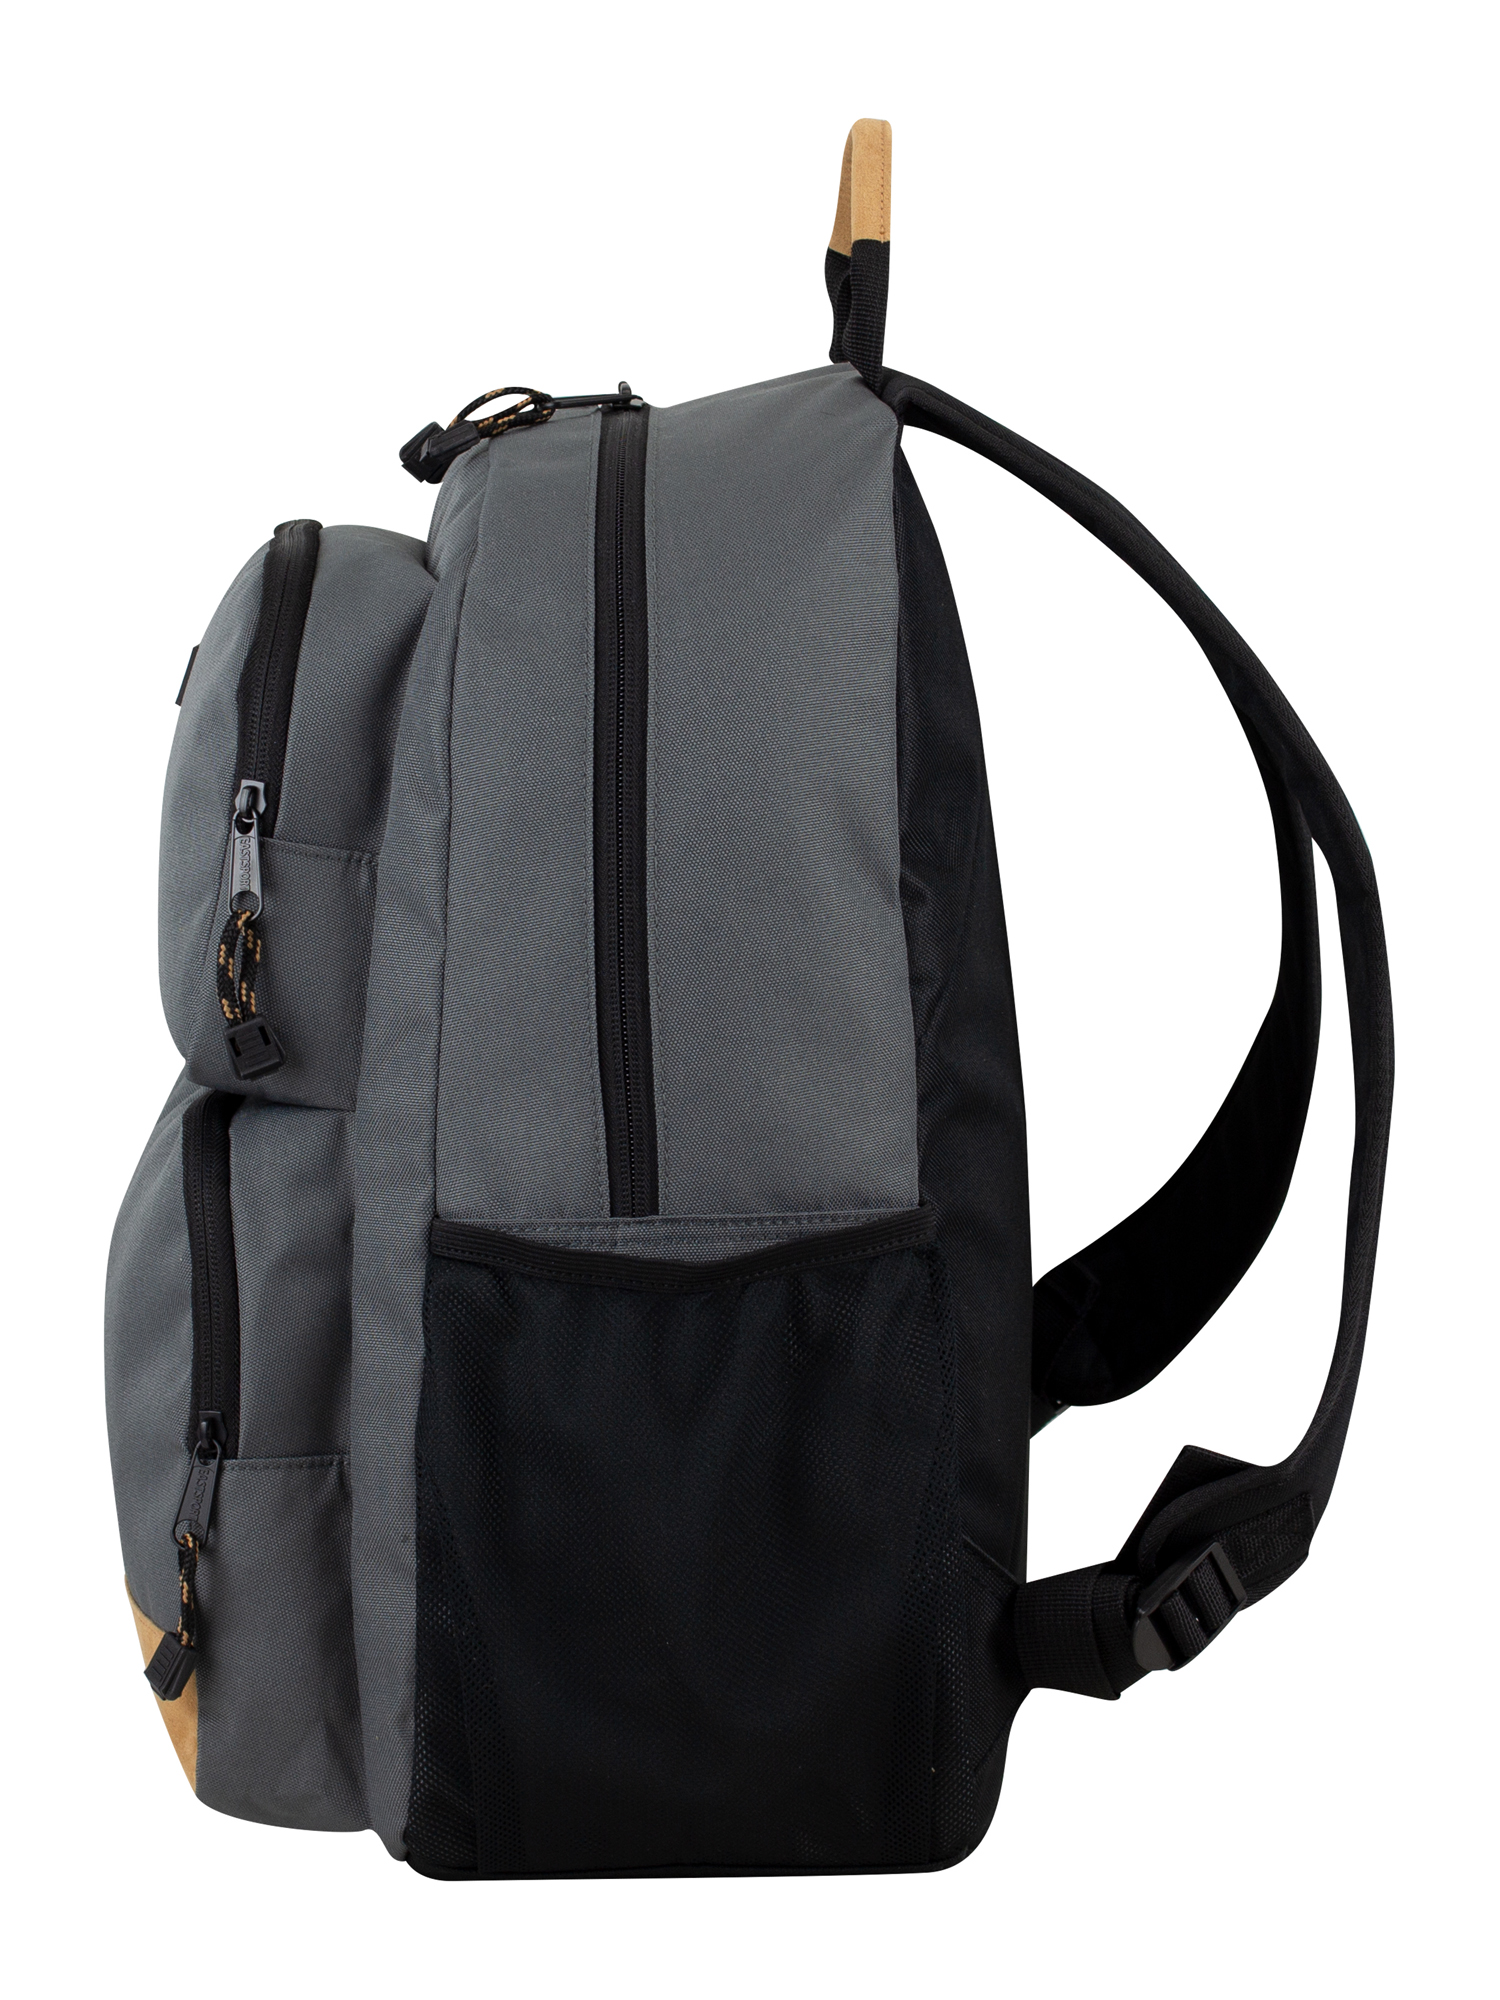 Eastsport Unisex Core Excel Backpack, Charcoal - image 4 of 7